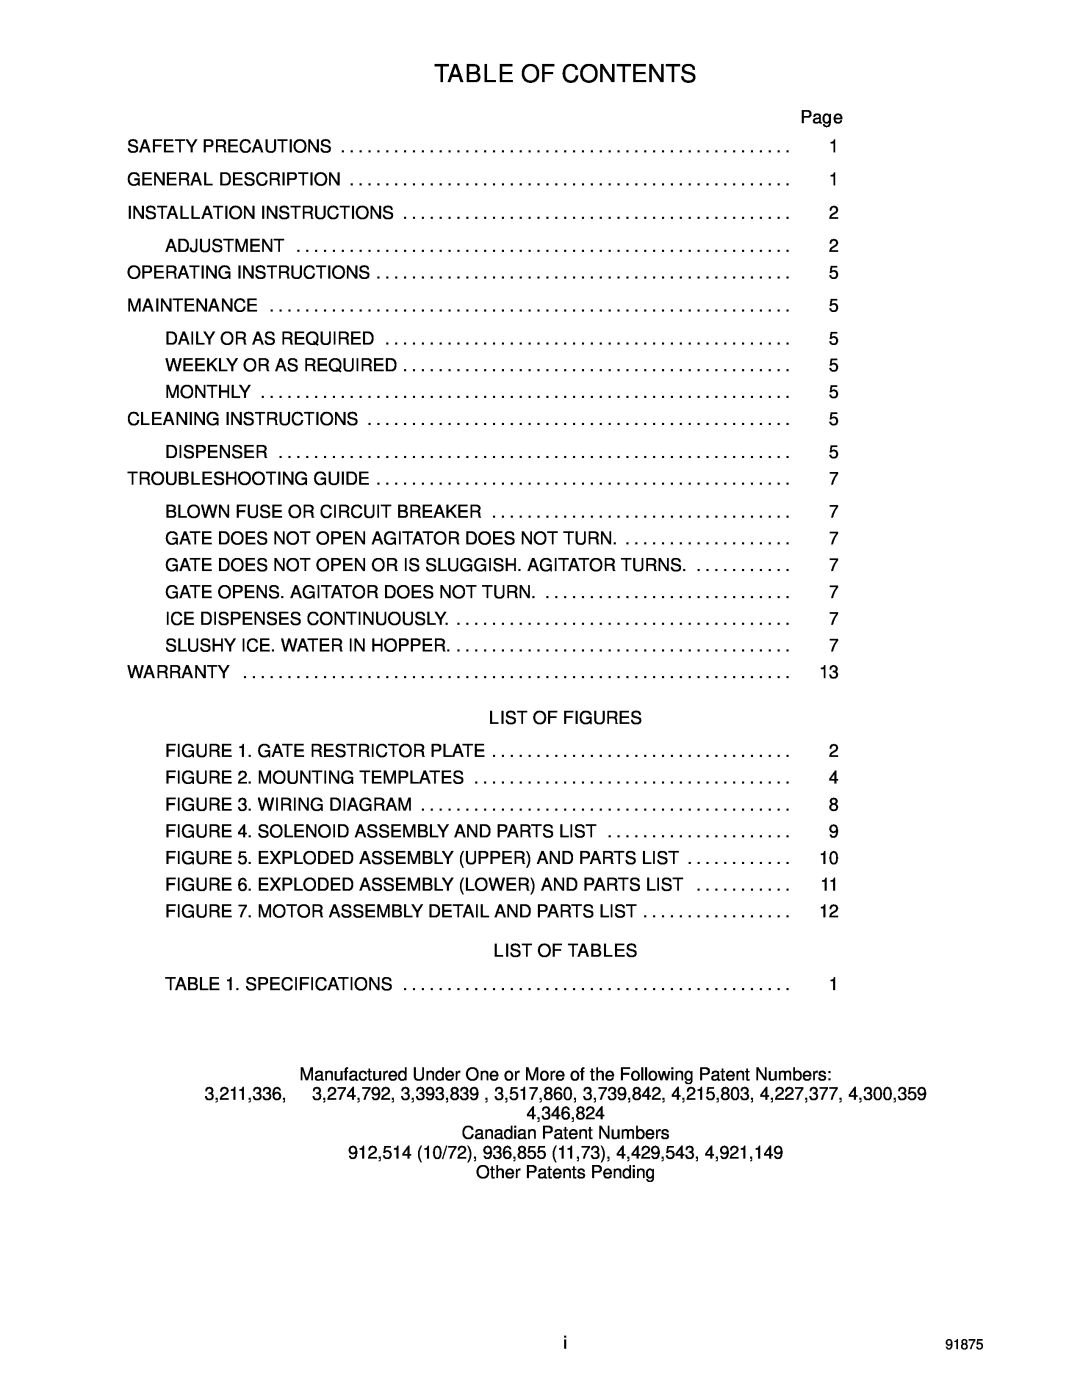 Cornelius D3030 manual List Of Figures, List Of Tables, Table Of Contents 